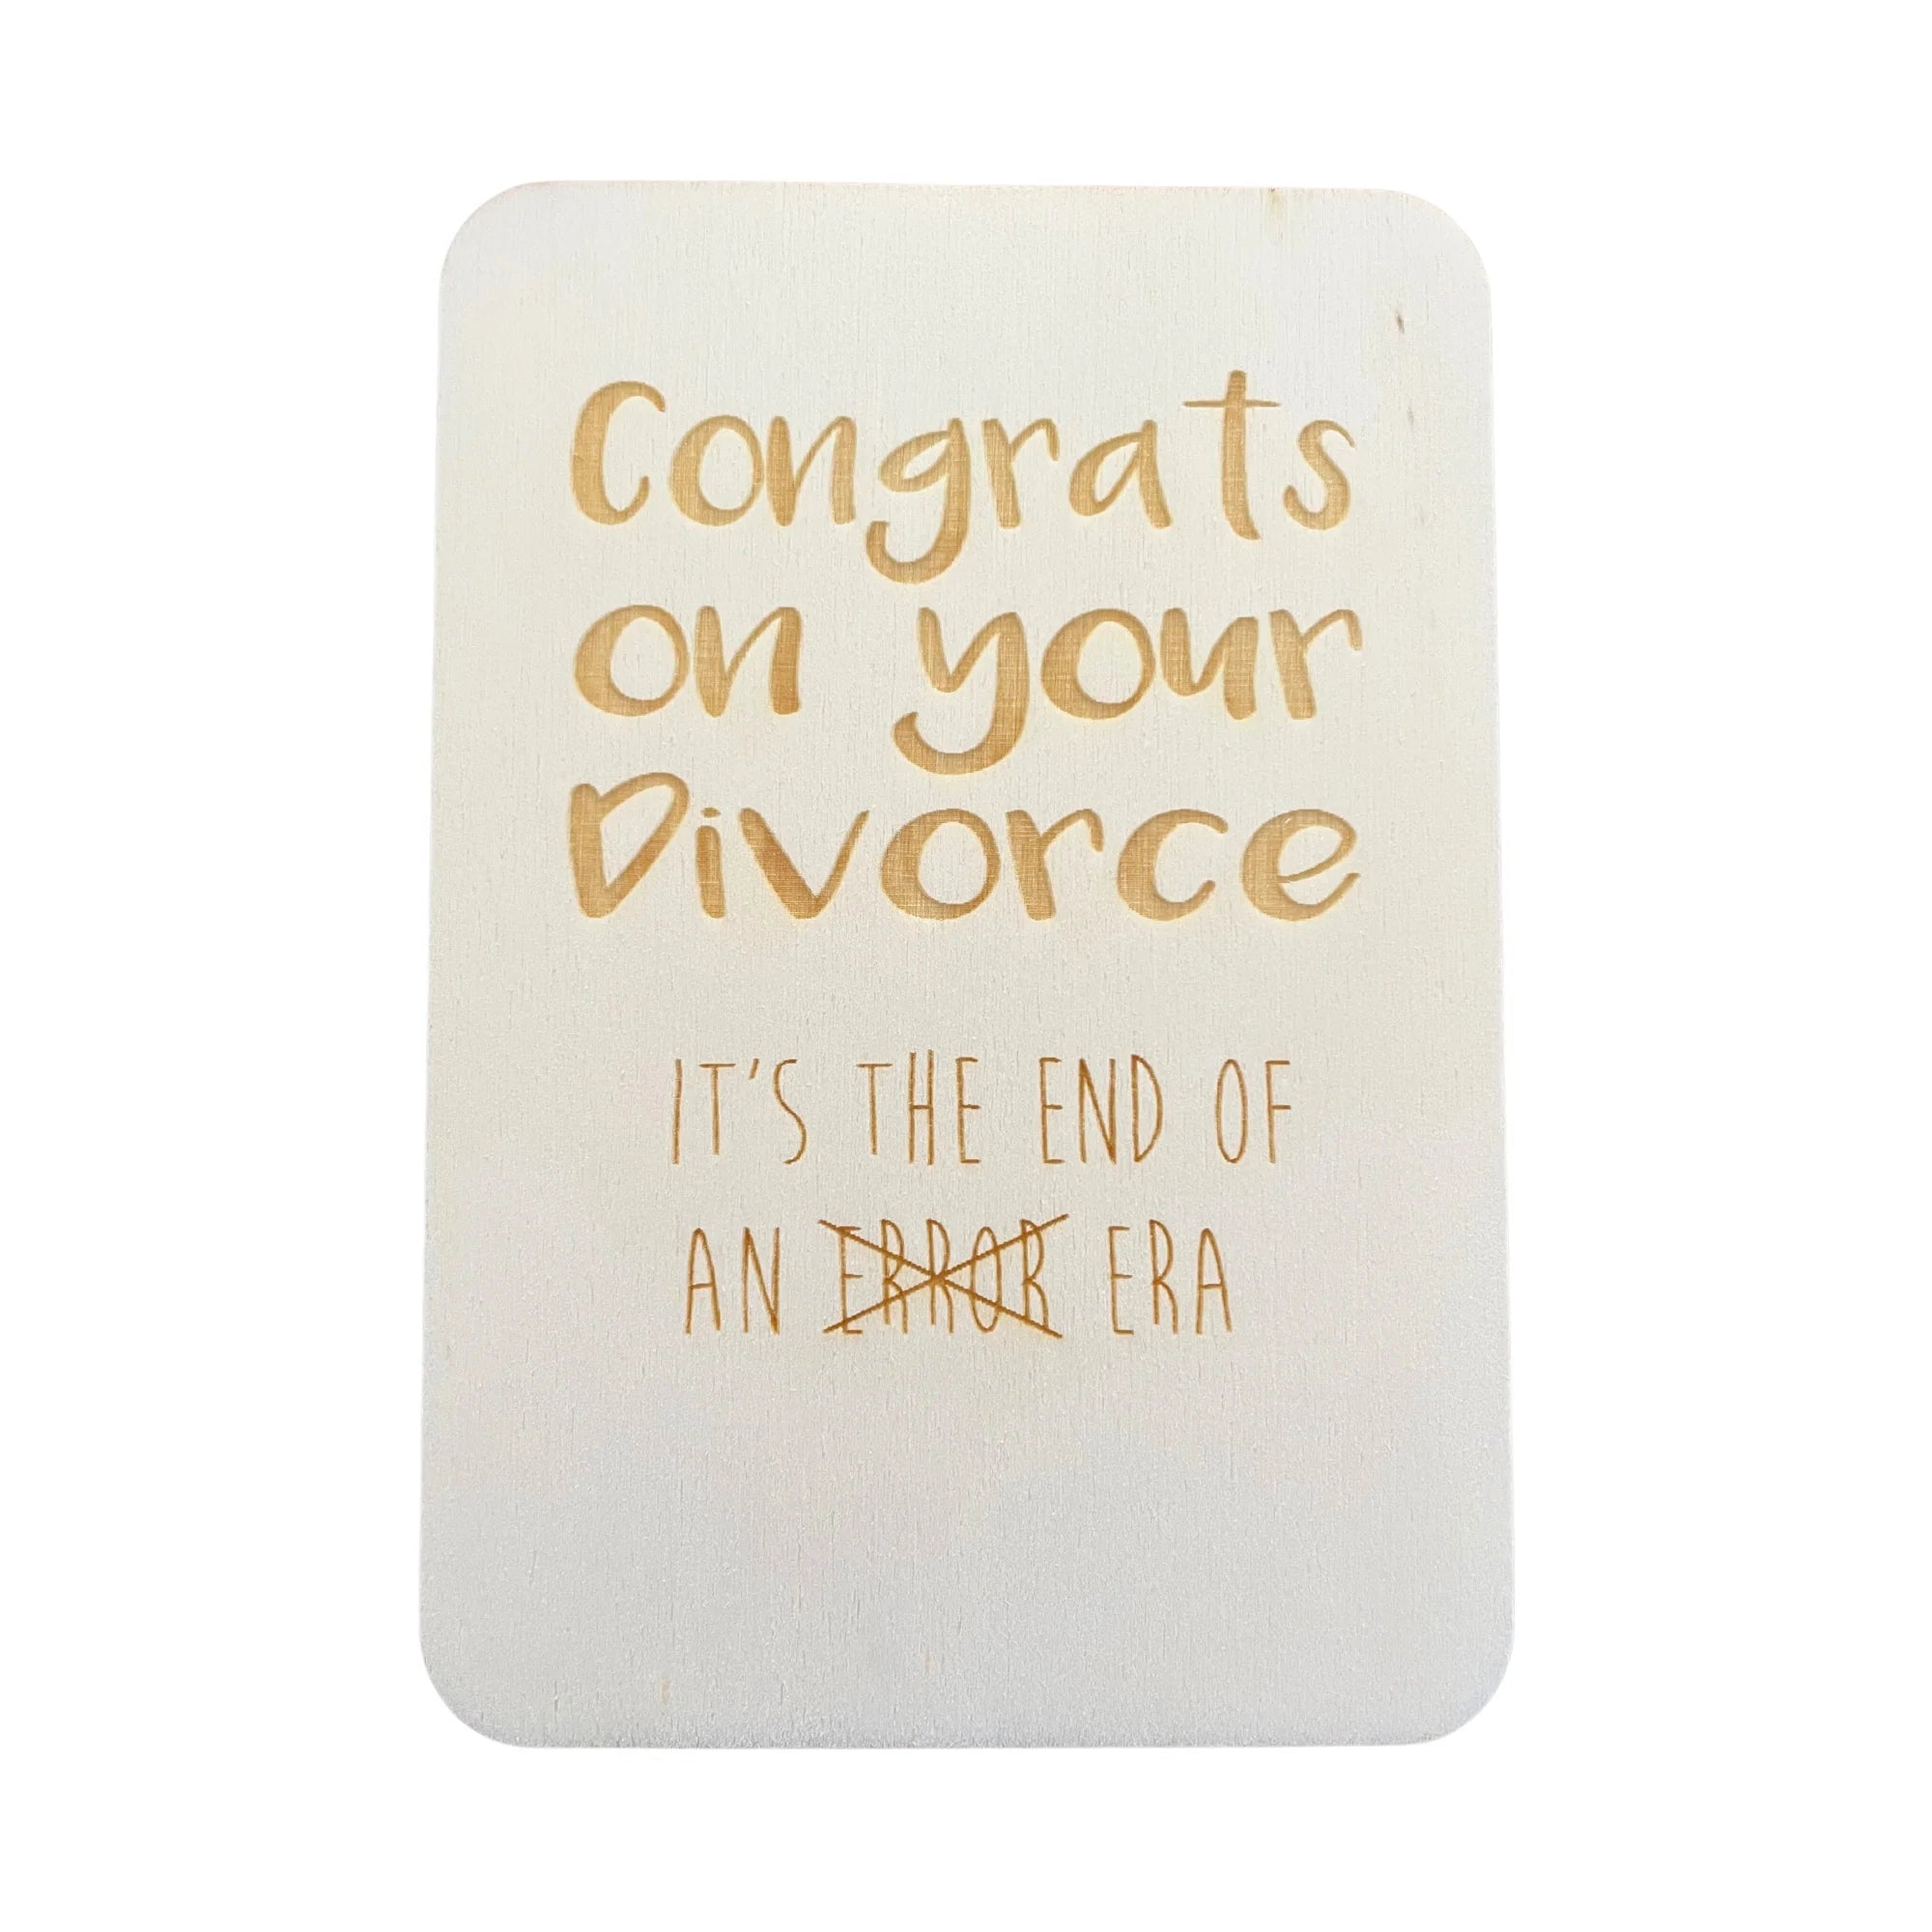 Congrats on your divorce